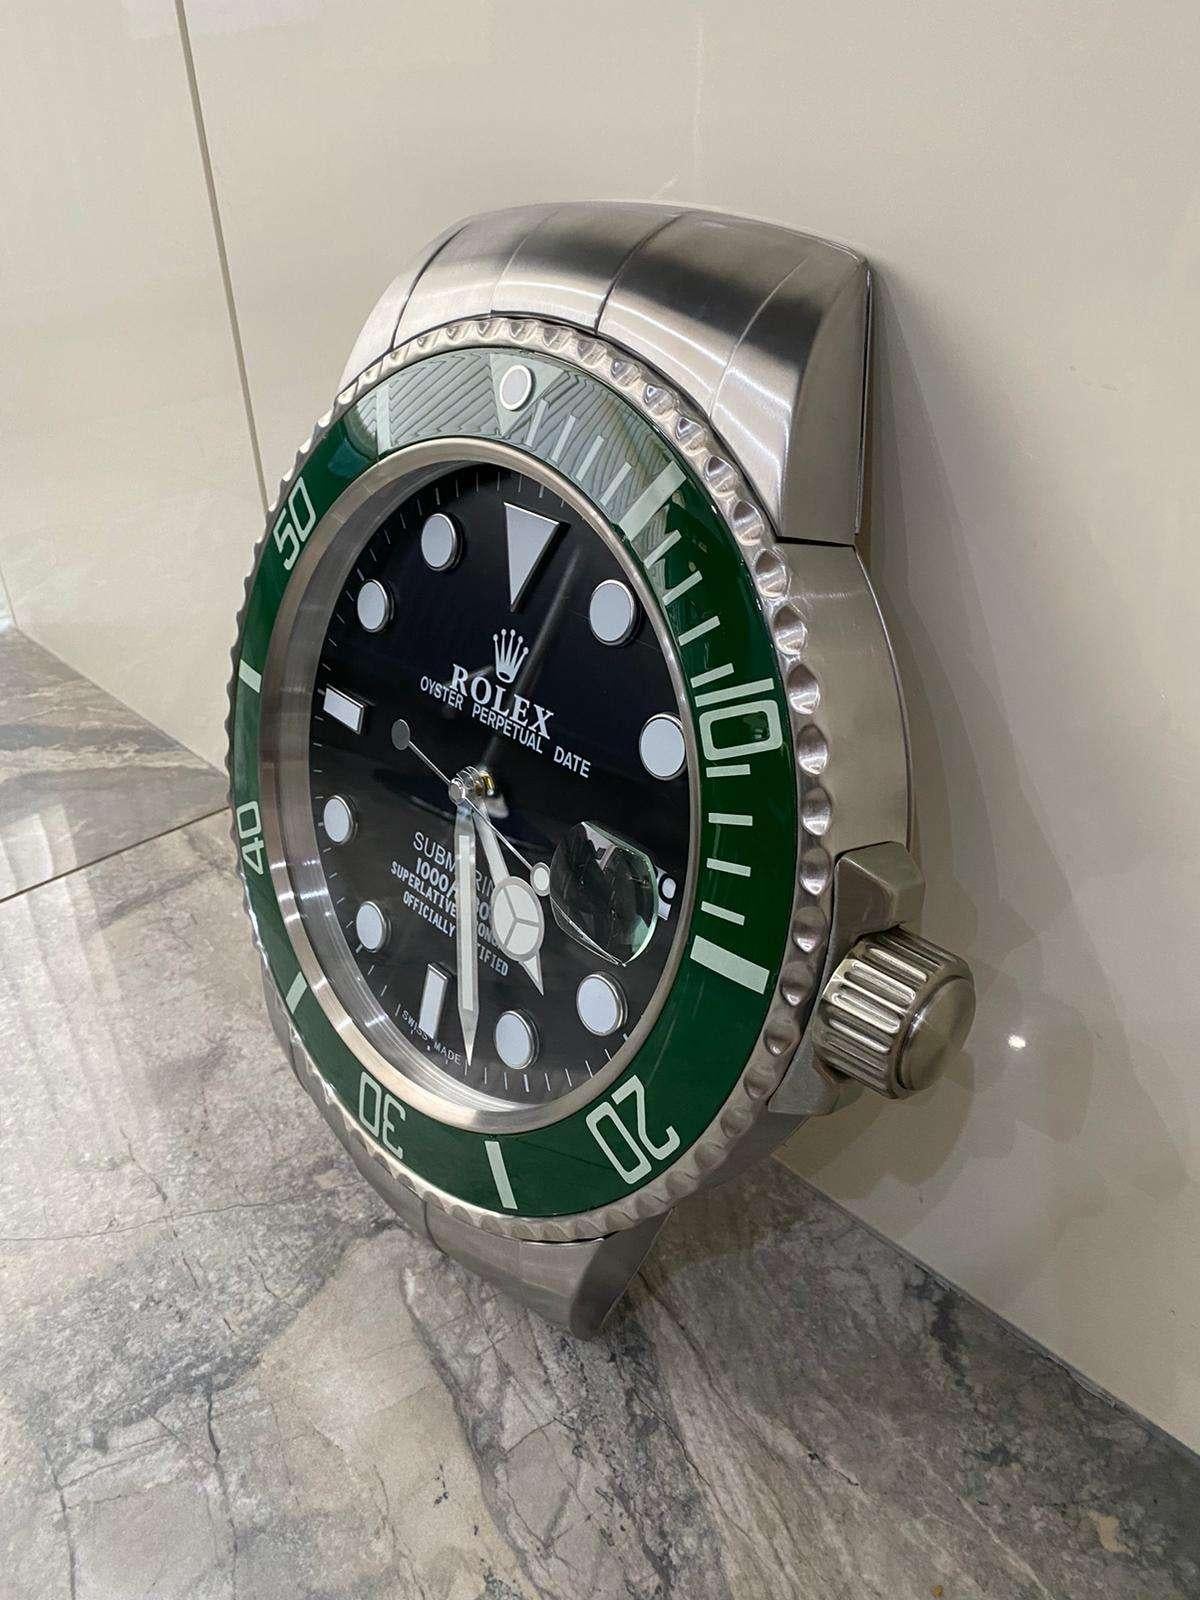 ROLEX Officially Certified Oyster Perpetual Green Submariner Wall Clock, aiguilles lumineuses, aiguilles à balayage
Expédition internationale gratuite.